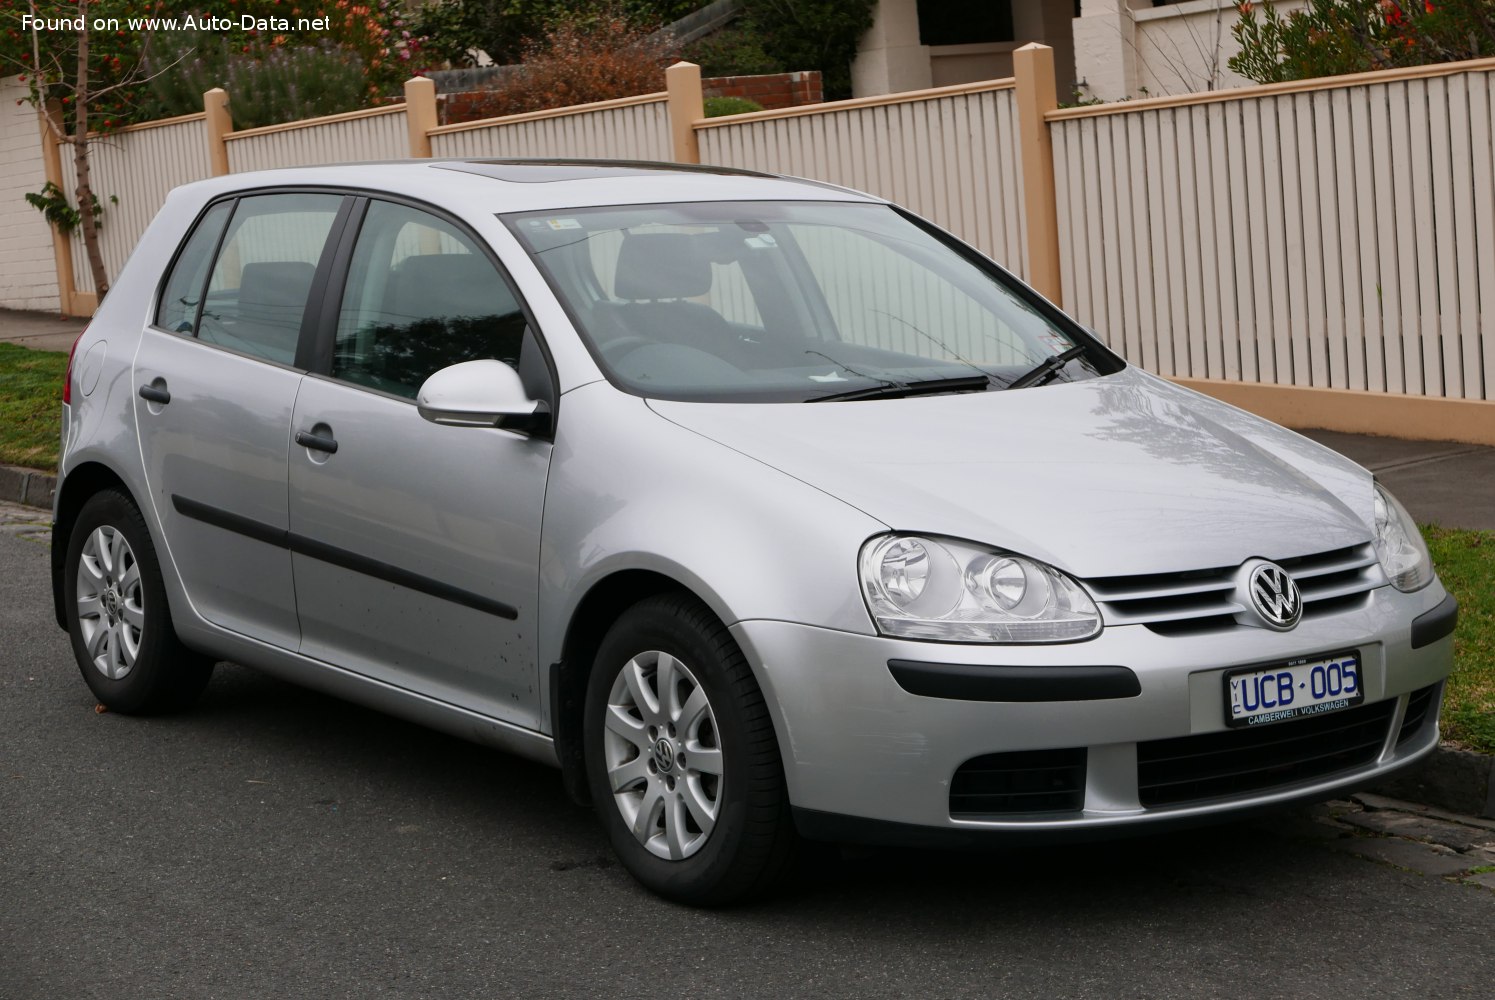 Store Tegne fuzzy 2005 Volkswagen Golf V 1.9 TDI (105 Hp) 4MOTION | Technical specs, data,  fuel consumption, Dimensions